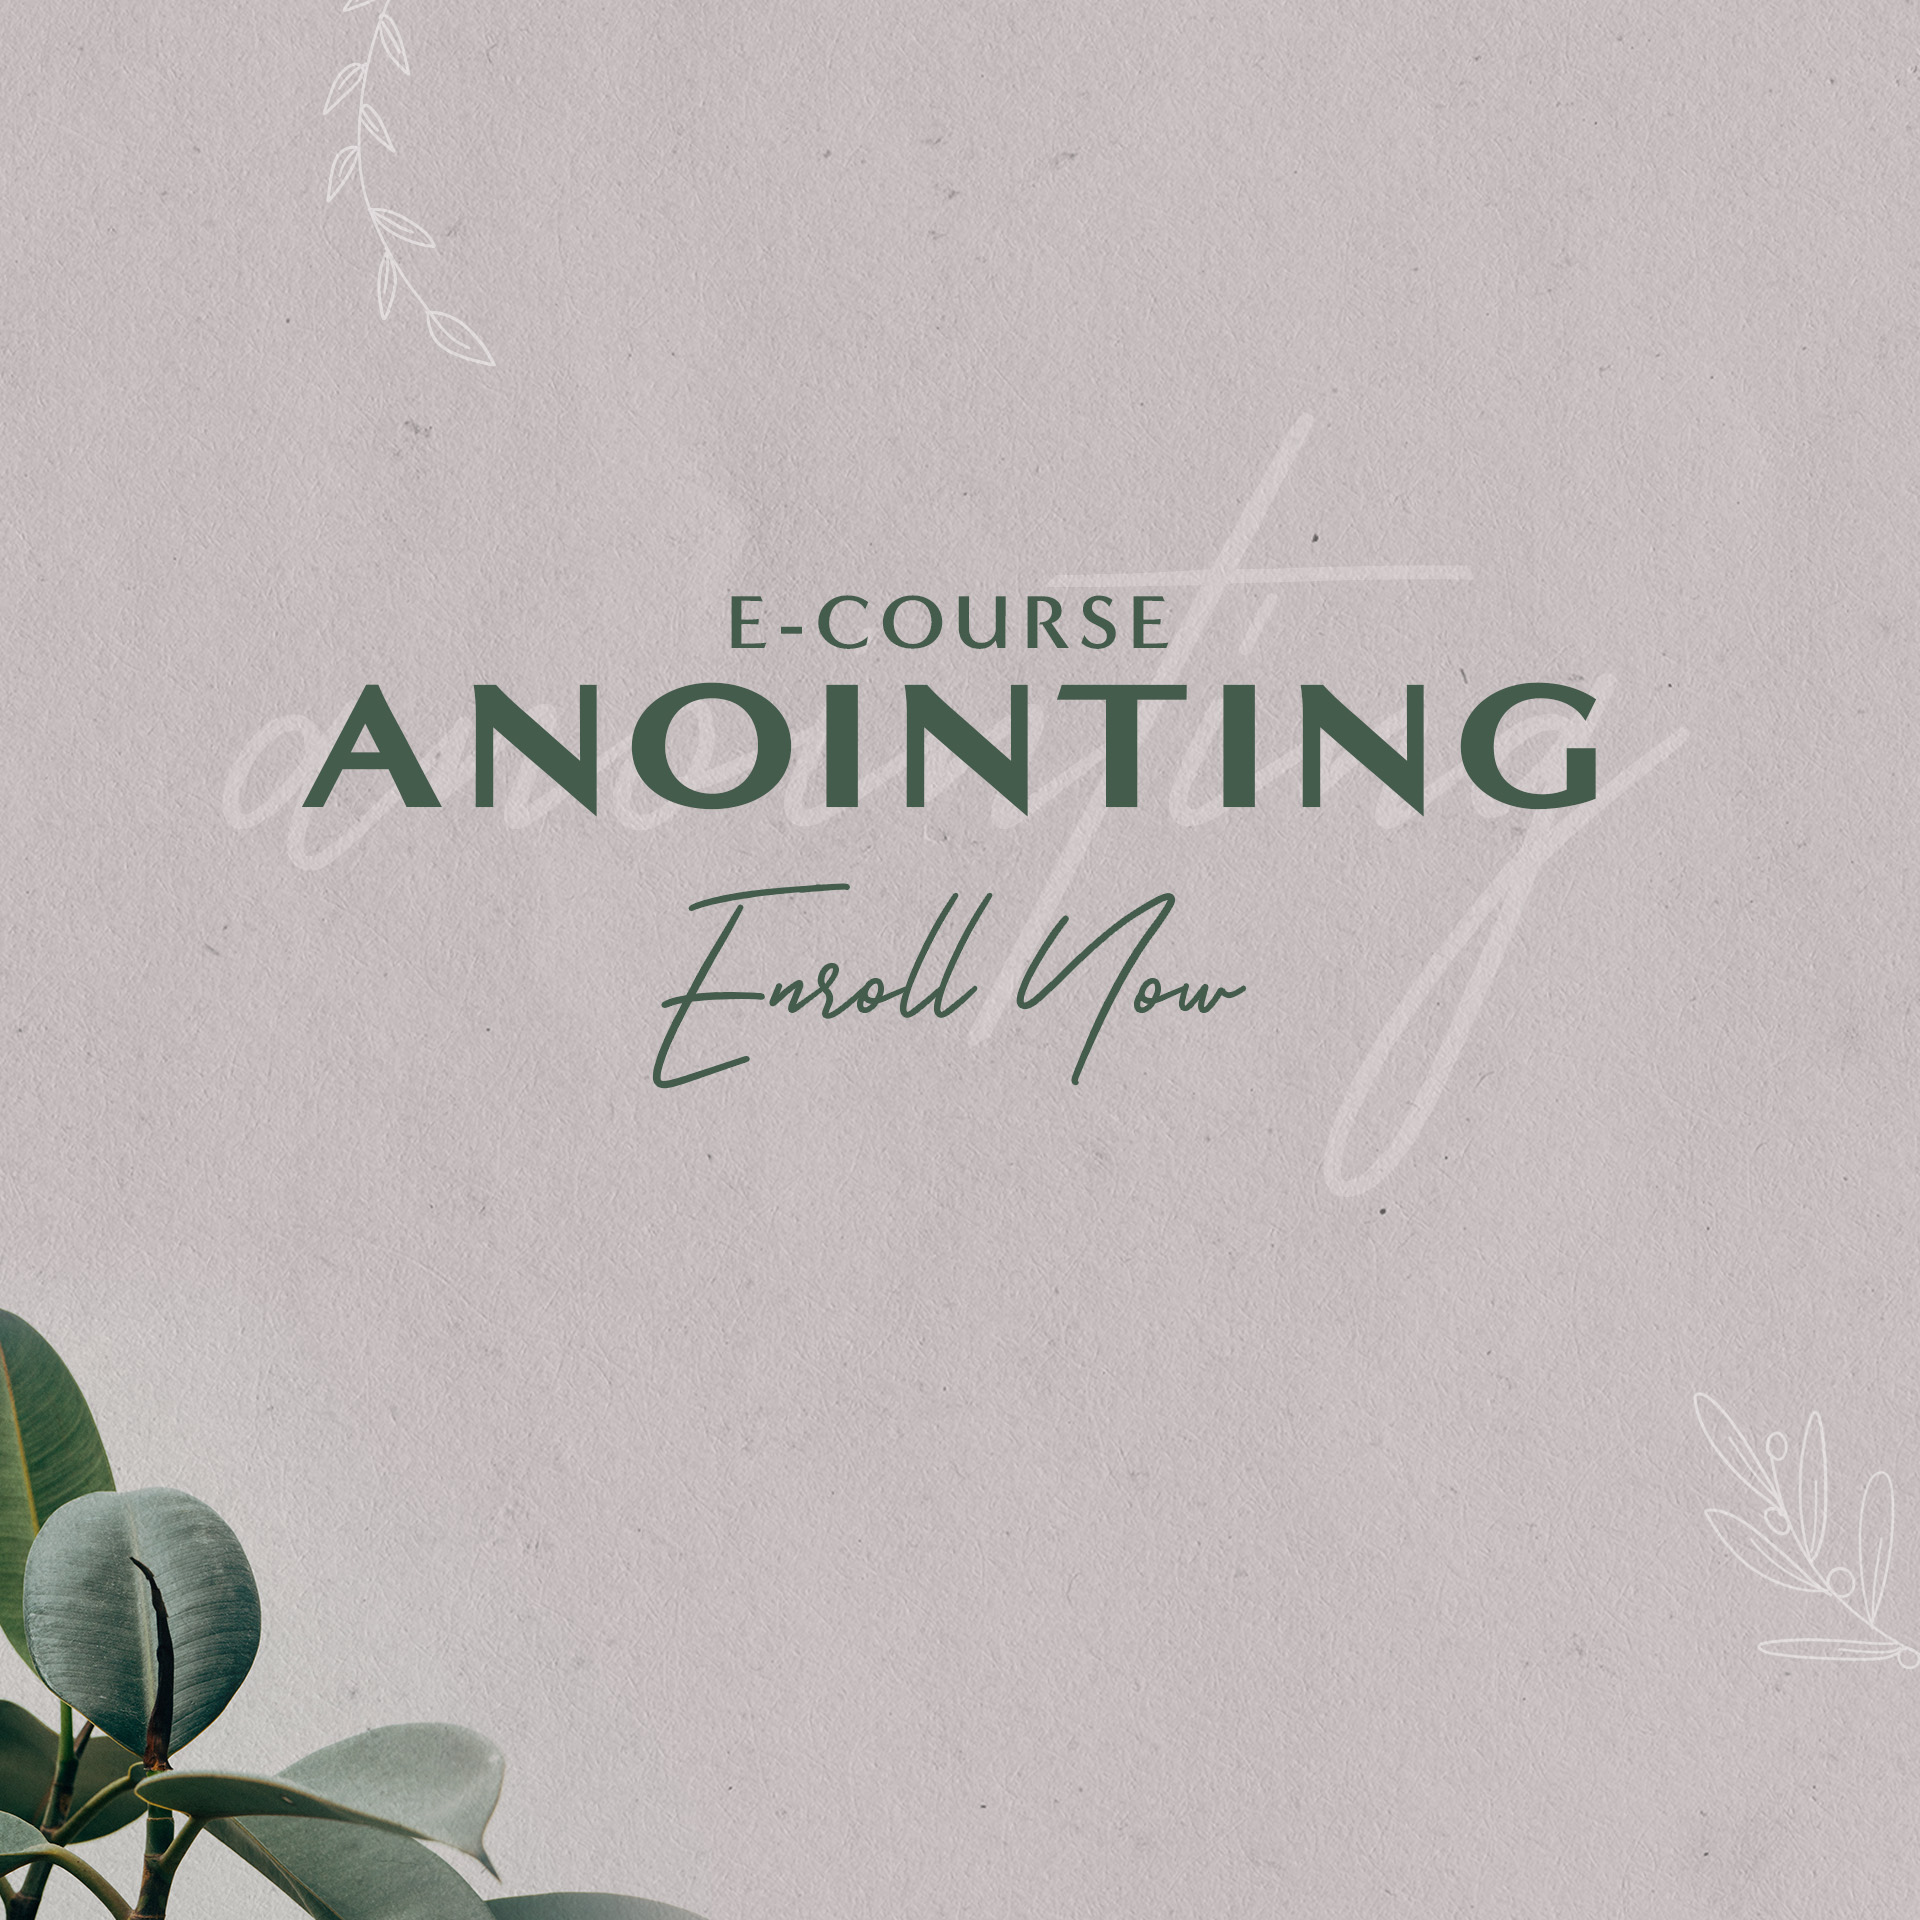 Featured Image for “Anointing”